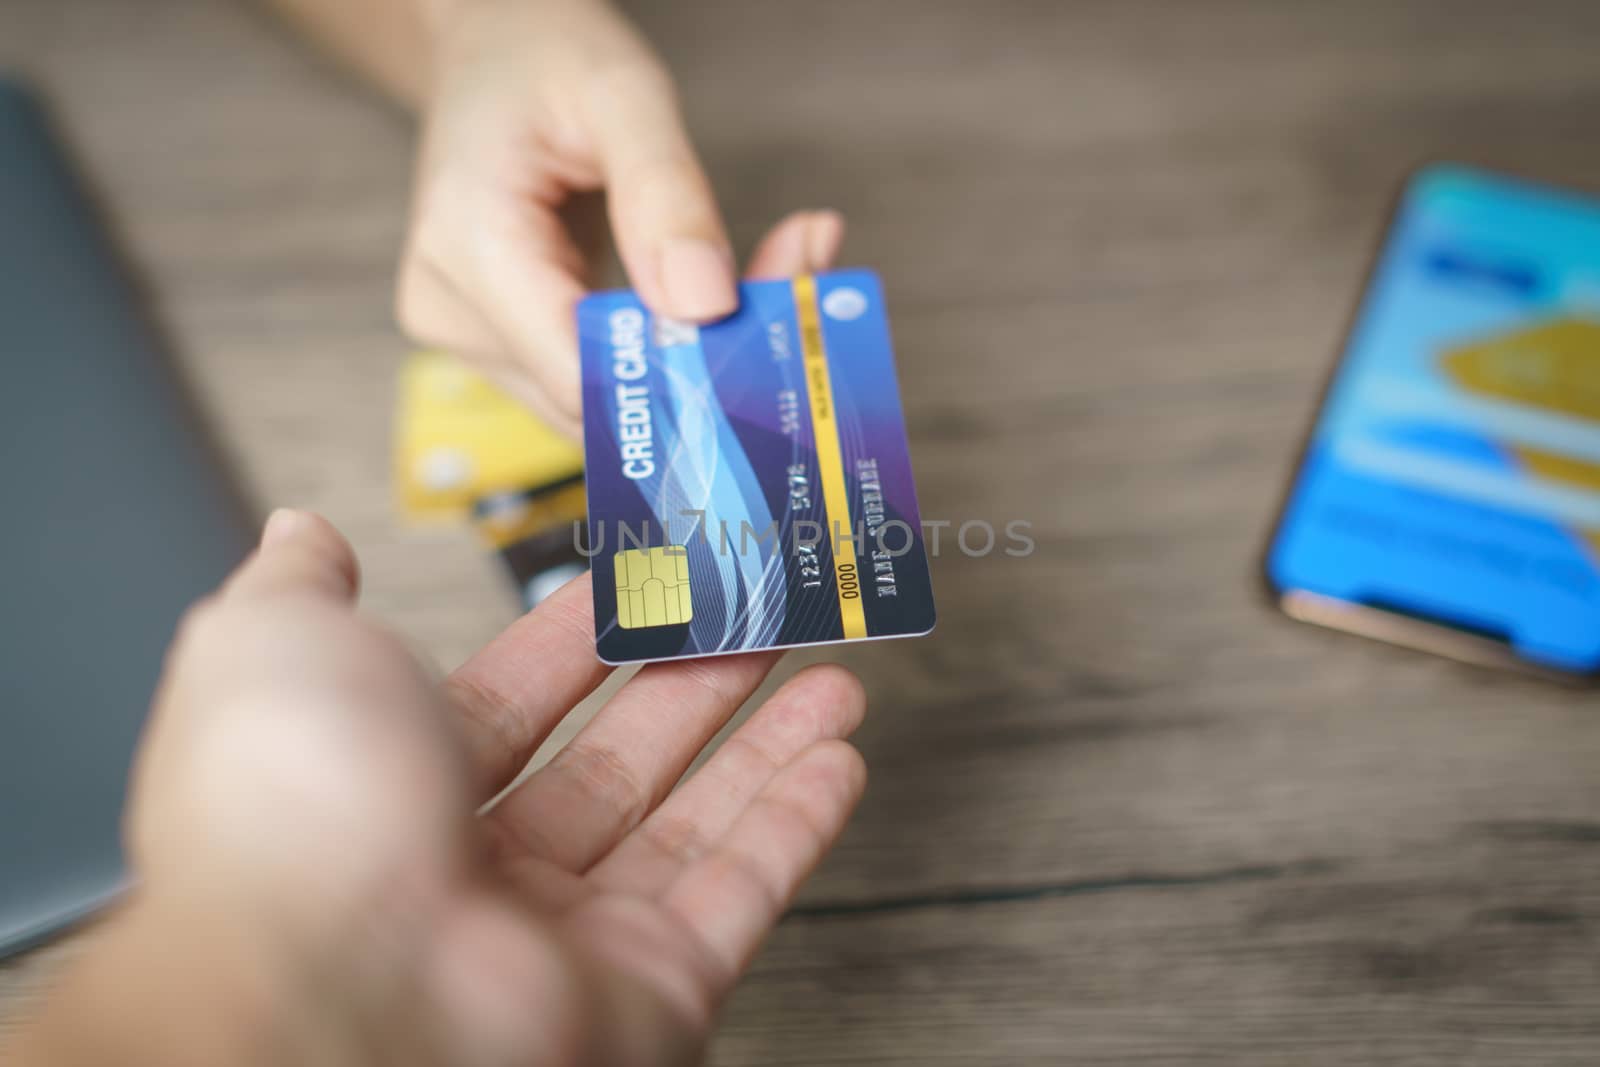 Woman is paying using a credit card, shopping and retail concept by sirawit99